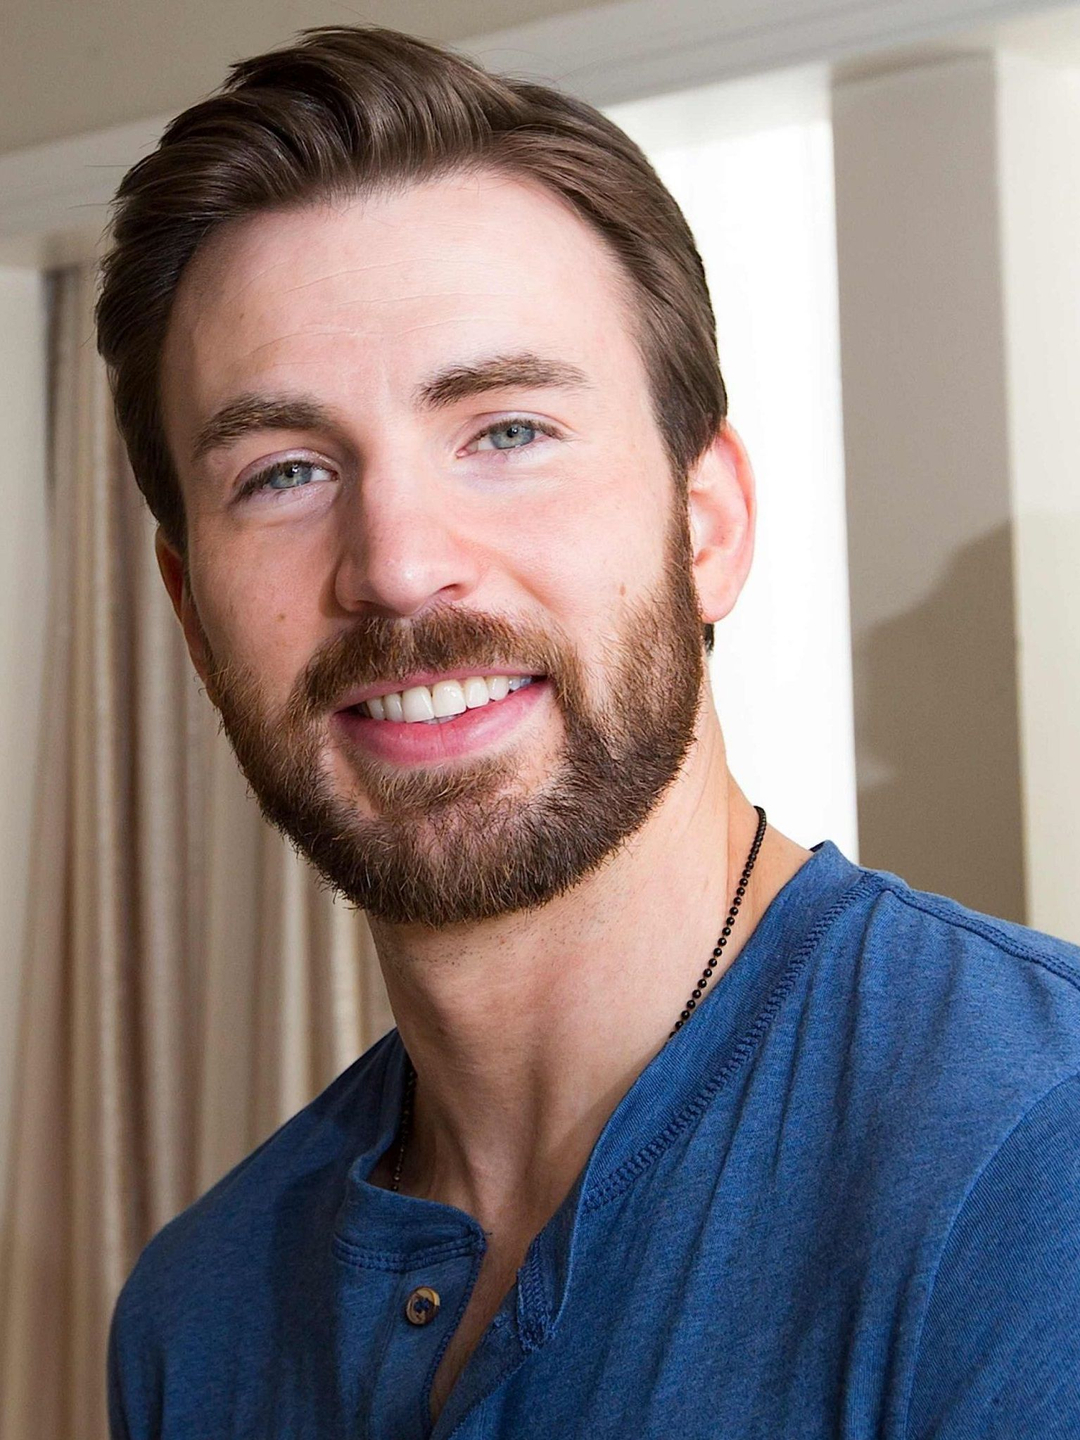 Chris Evans does he have kids